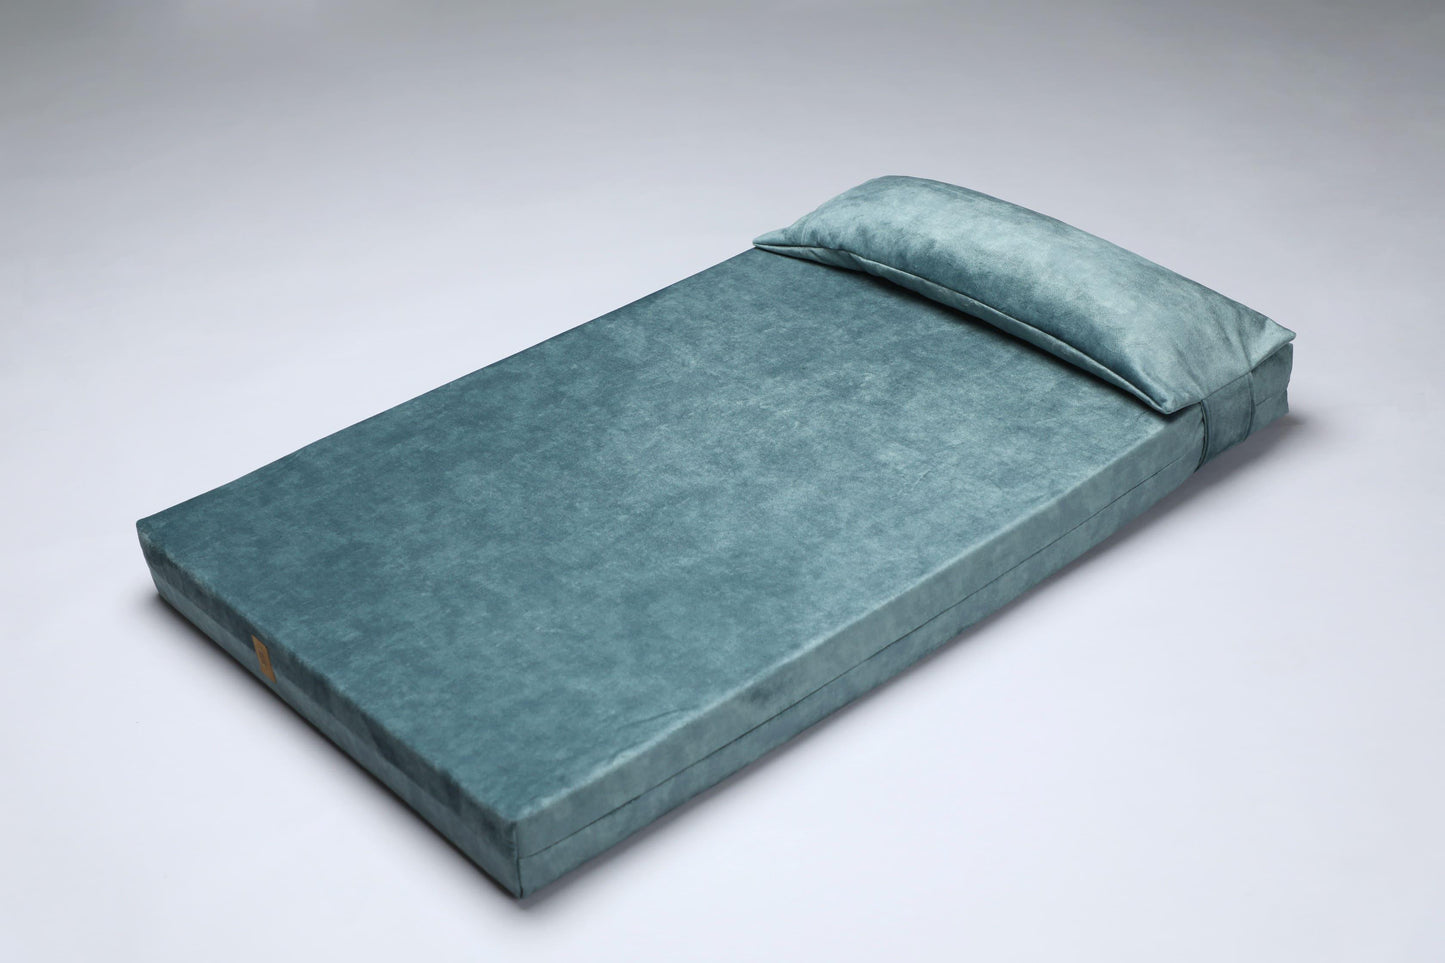 2-sided velvet dog bed. DUSTY GREEN - European handmade dog accessories by My Wild Other